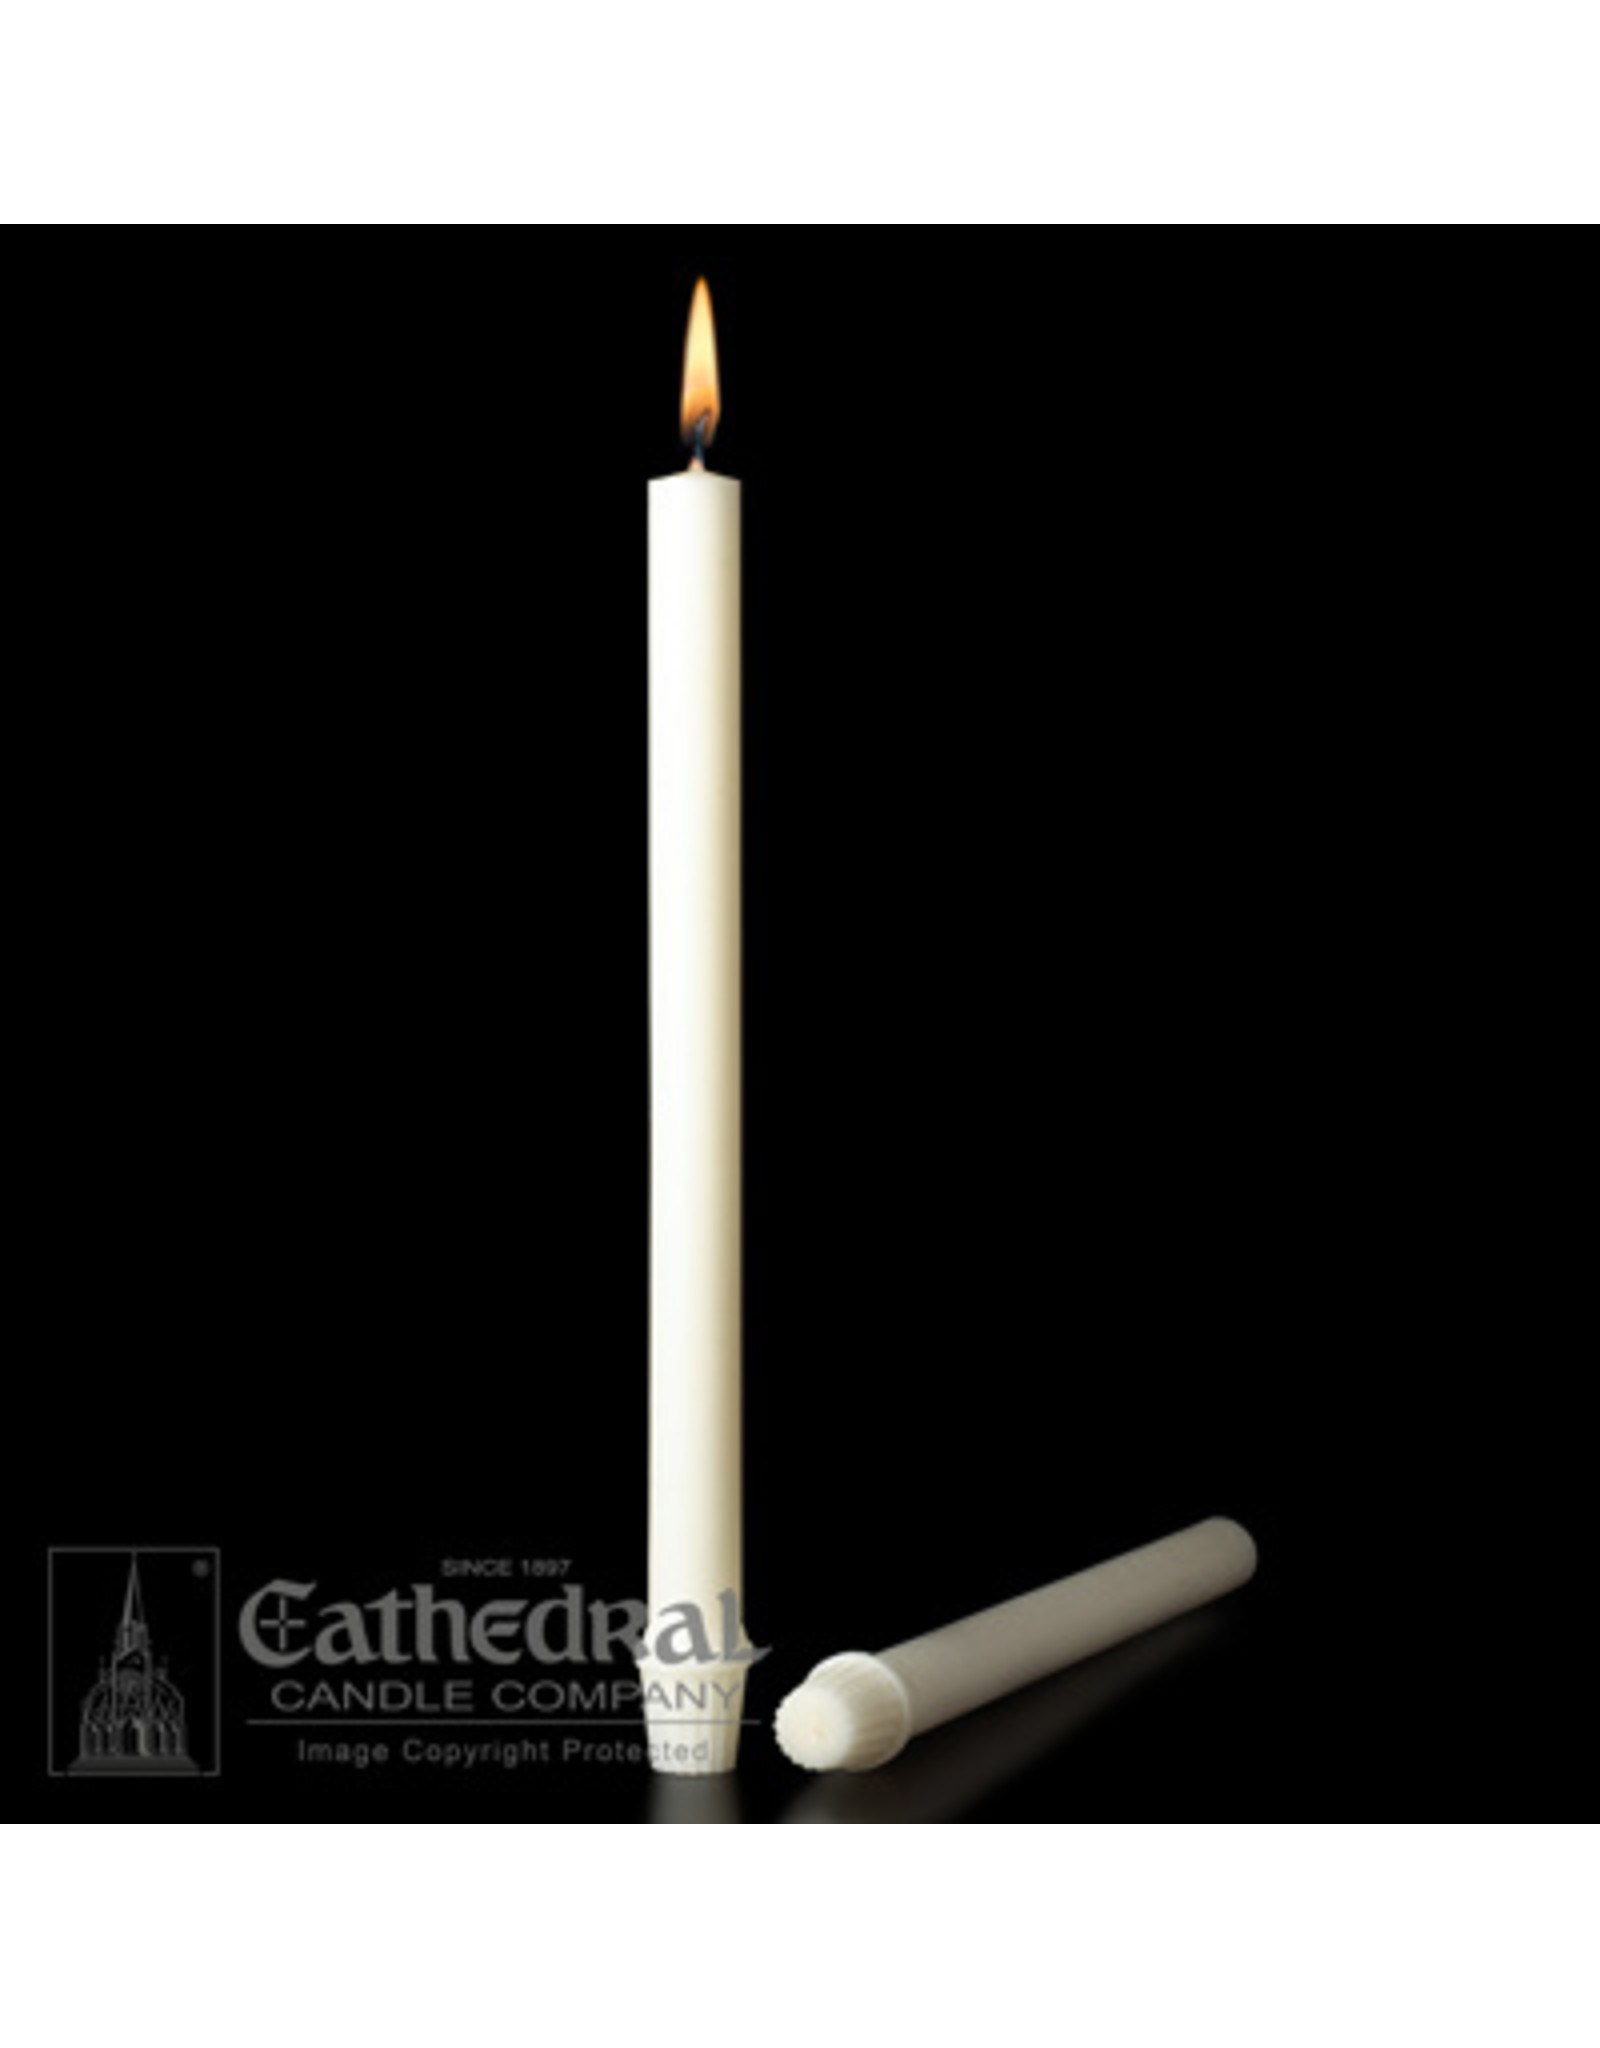 Cathedral Candle 51% Beeswax Altar Candles 1-1/8"x15" SFE (12)